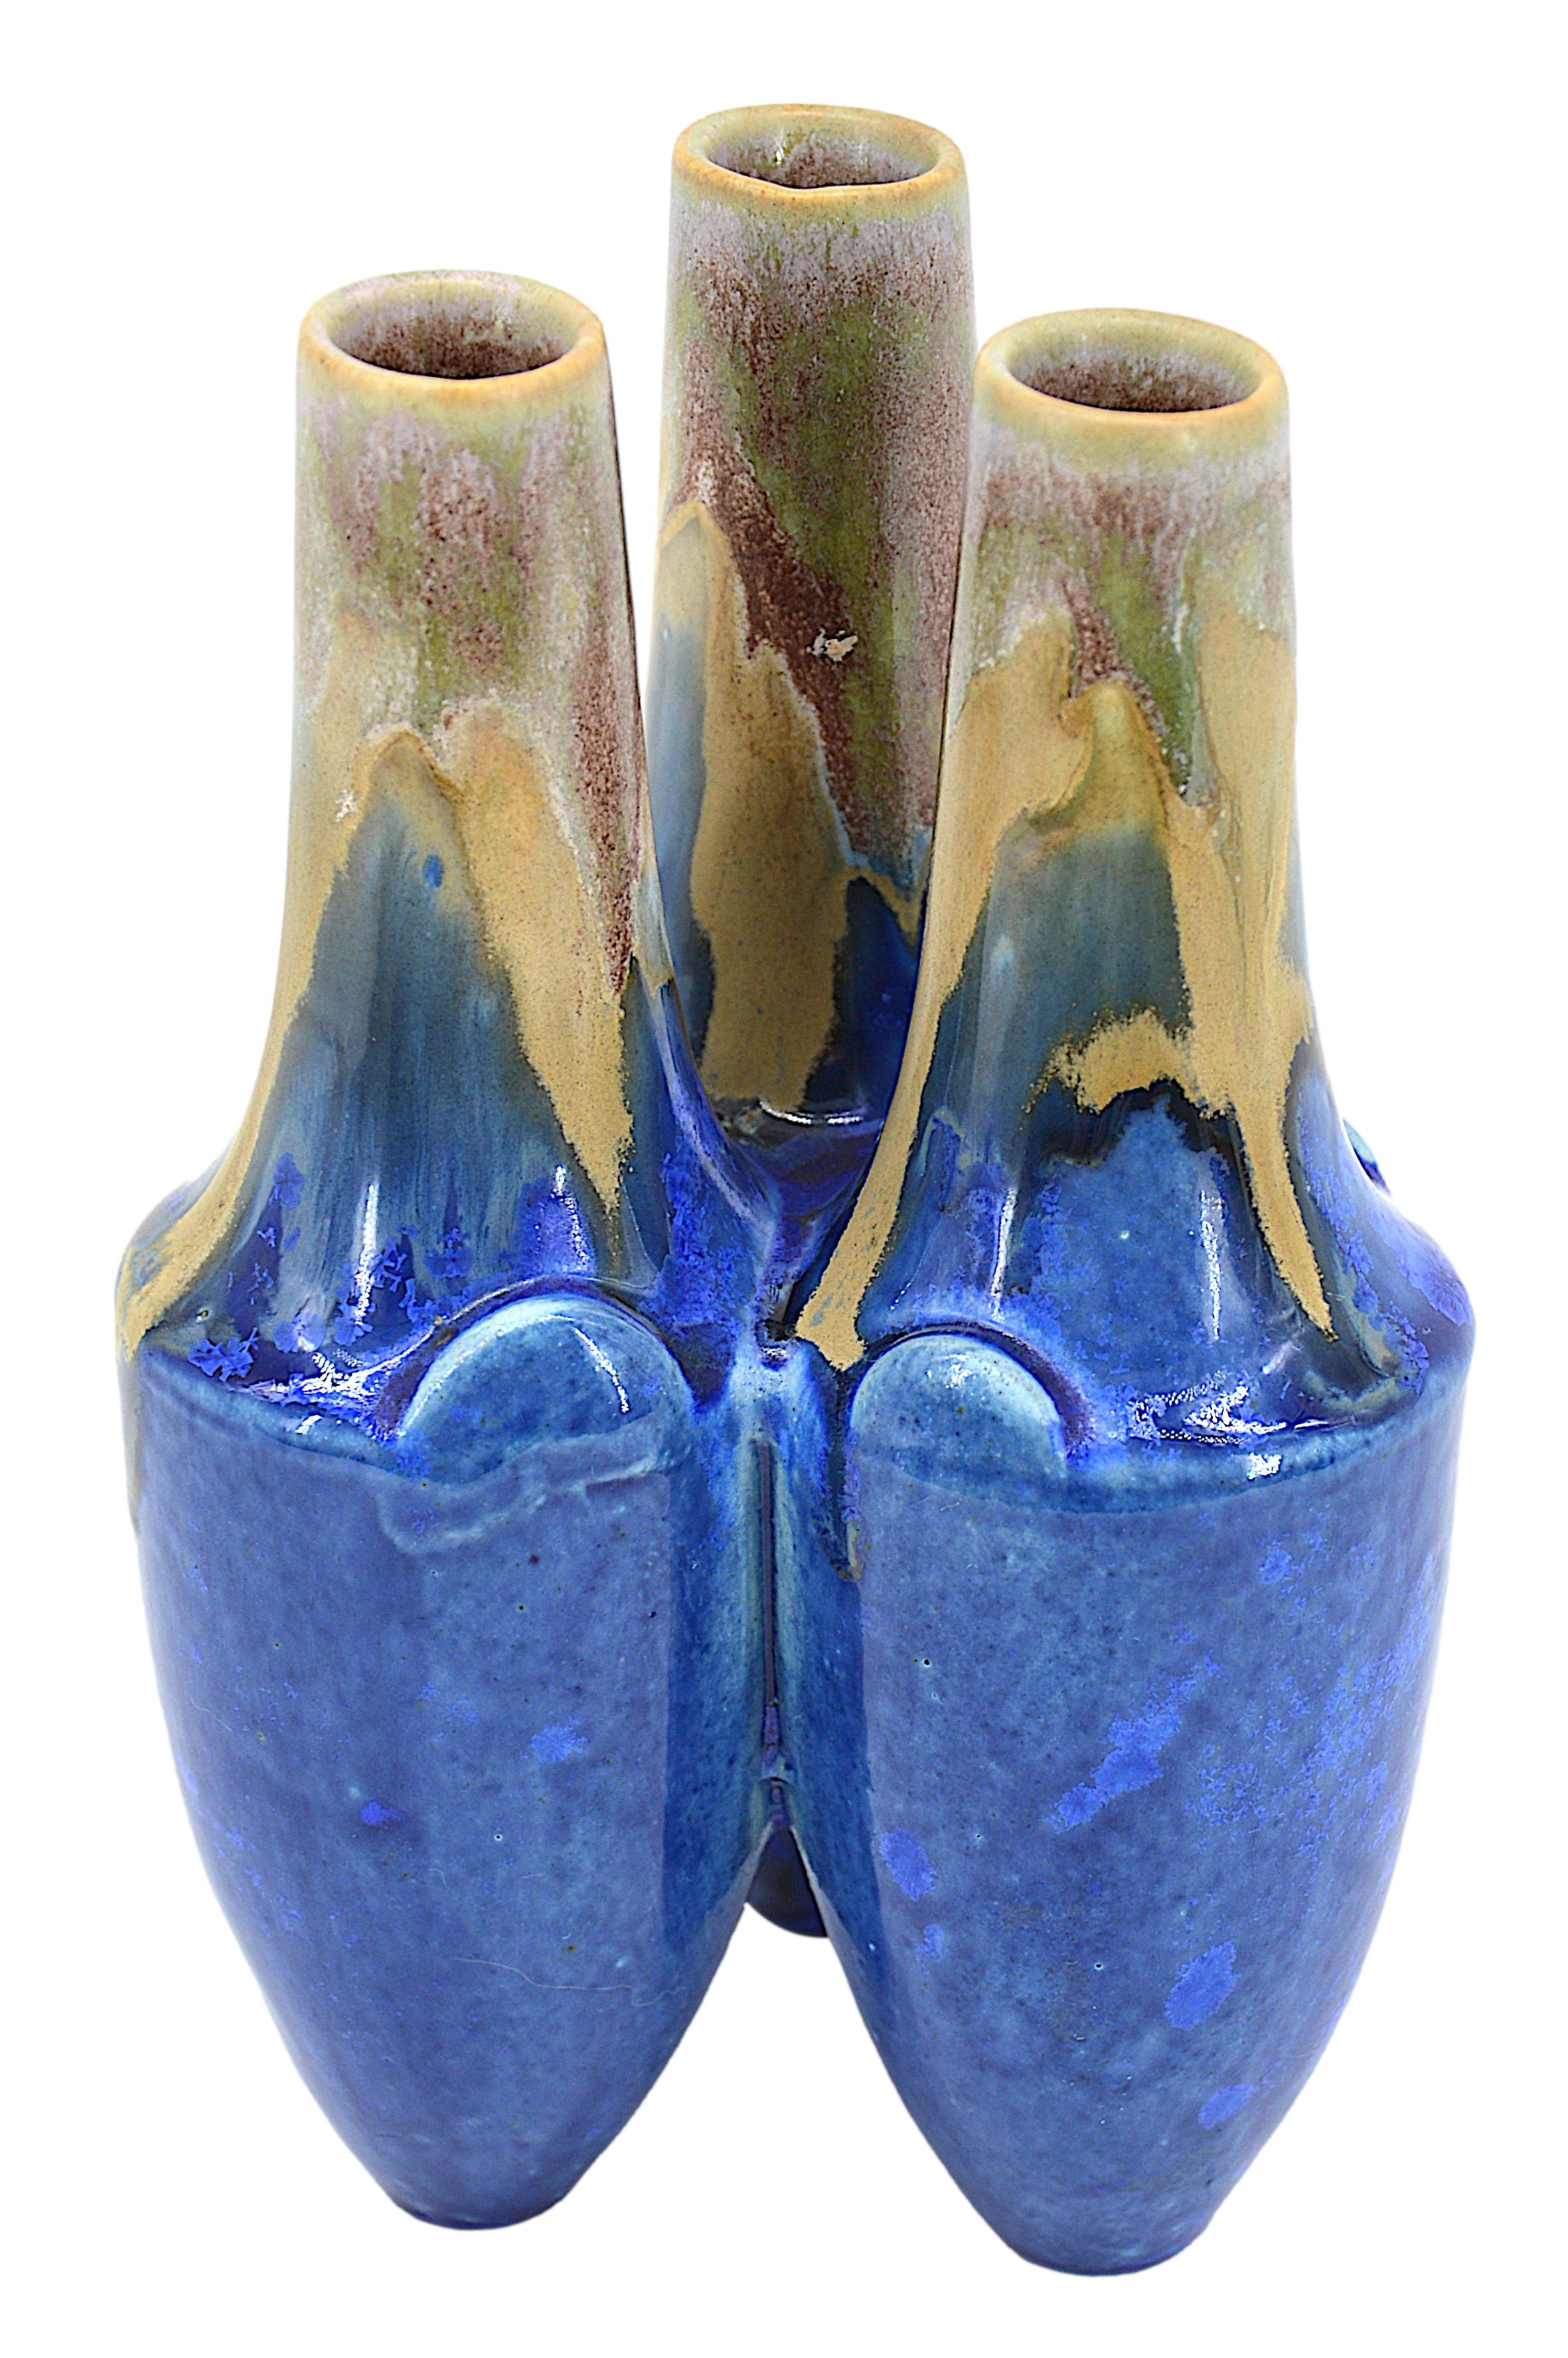 French Art Deco stoneware vase by Gilbert METENIER (Gannat), France, ca.1920. Nice stoneware vase for short cut flowers. Composed of three small vases. Height : 6.7